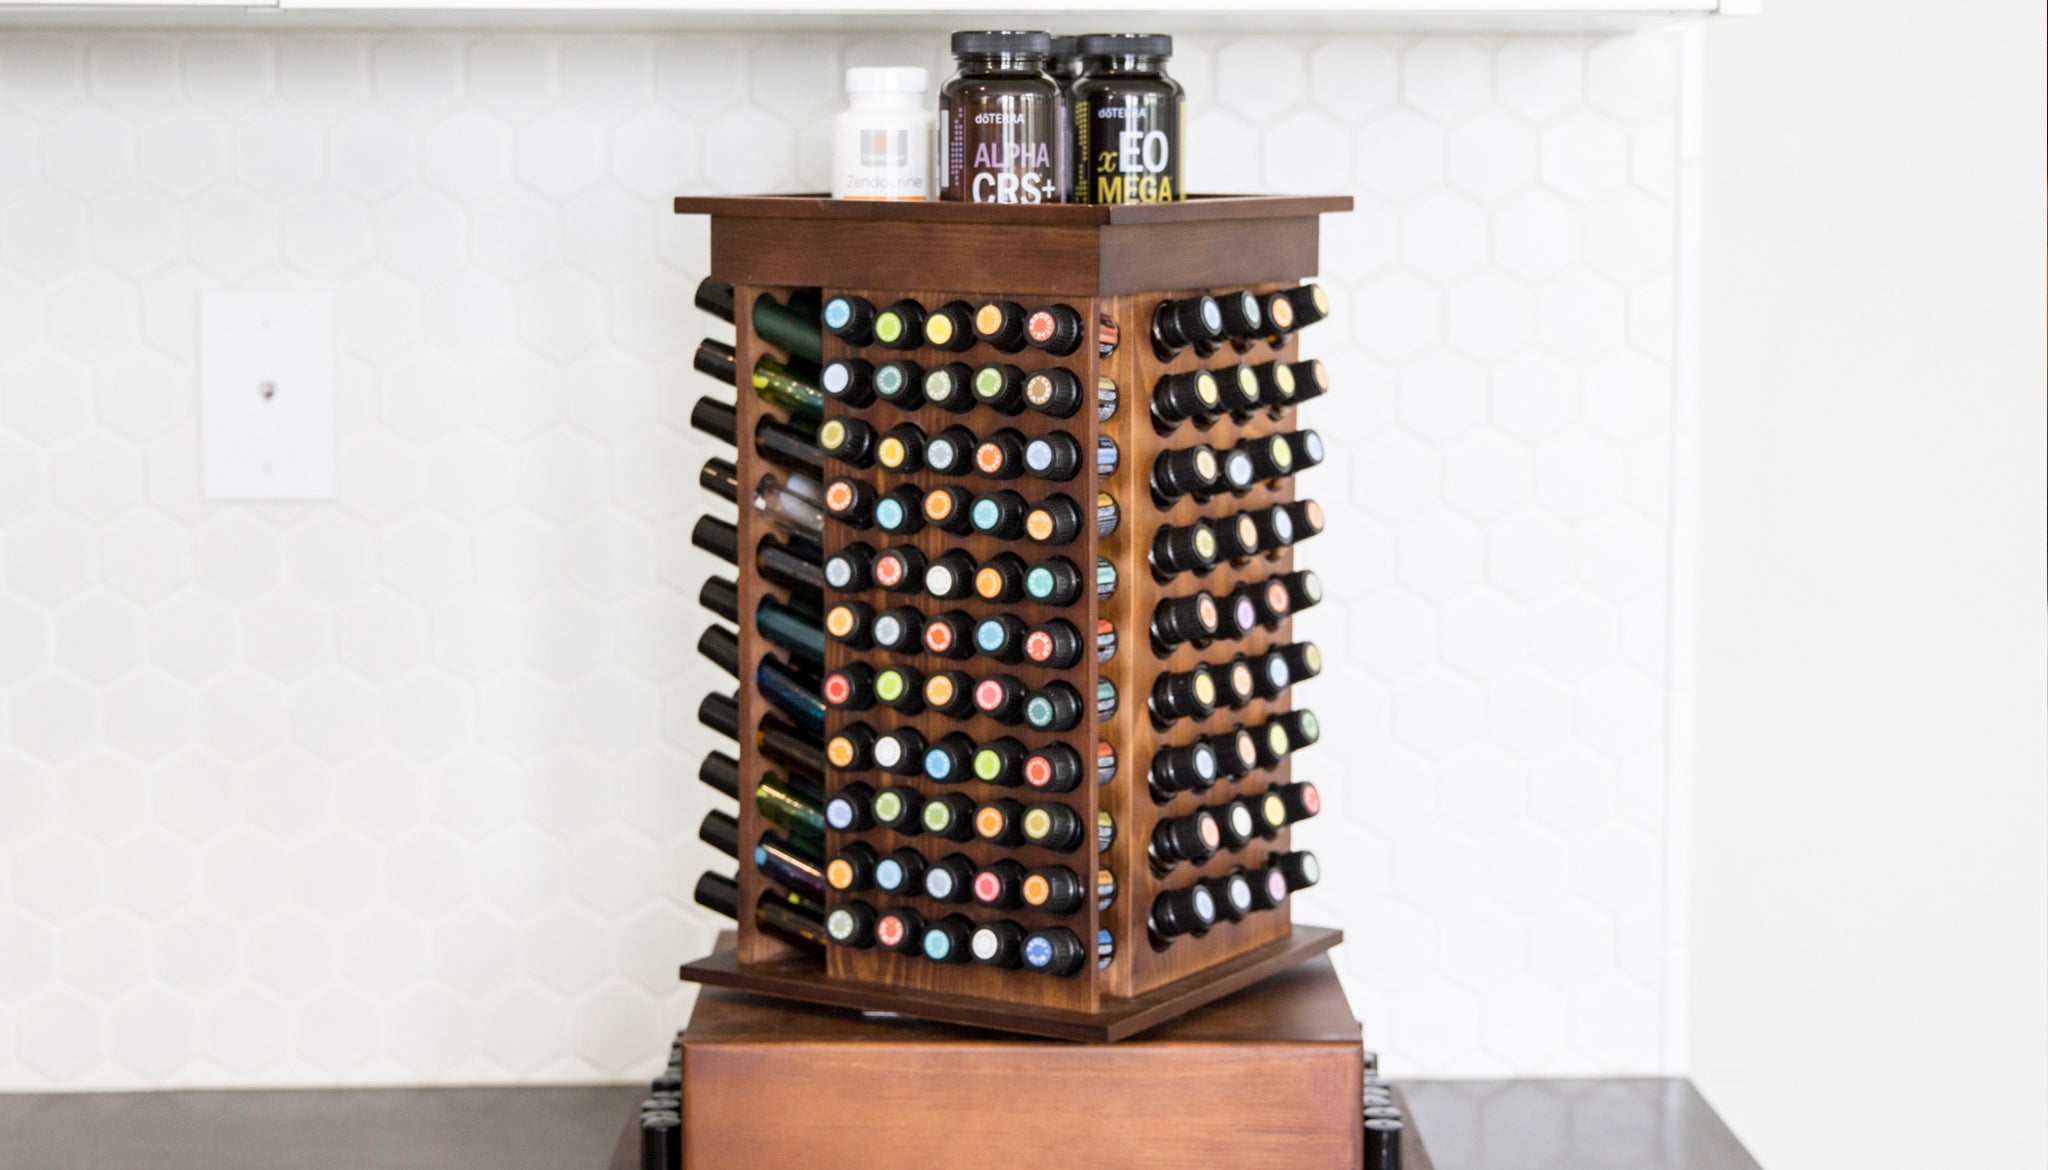 Introducing the Rotating Essential Oil Rack 2.0